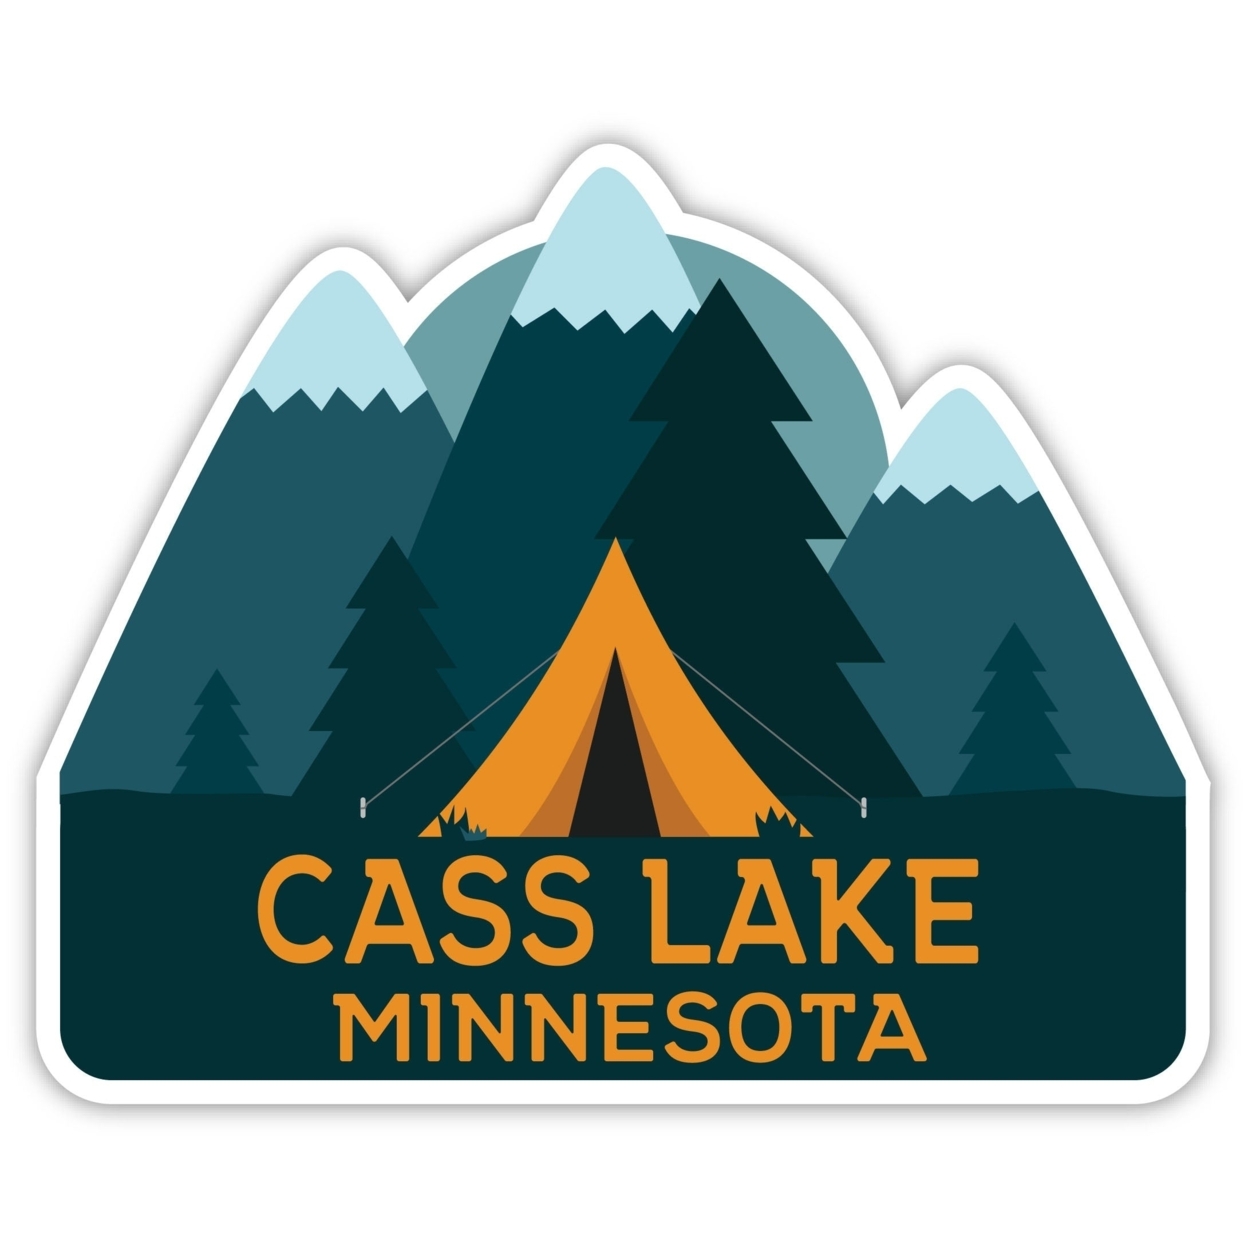 Cass Lake Minnesota Souvenir Decorative Stickers (Choose Theme And Size) - 4-Pack, 6-Inch, Tent